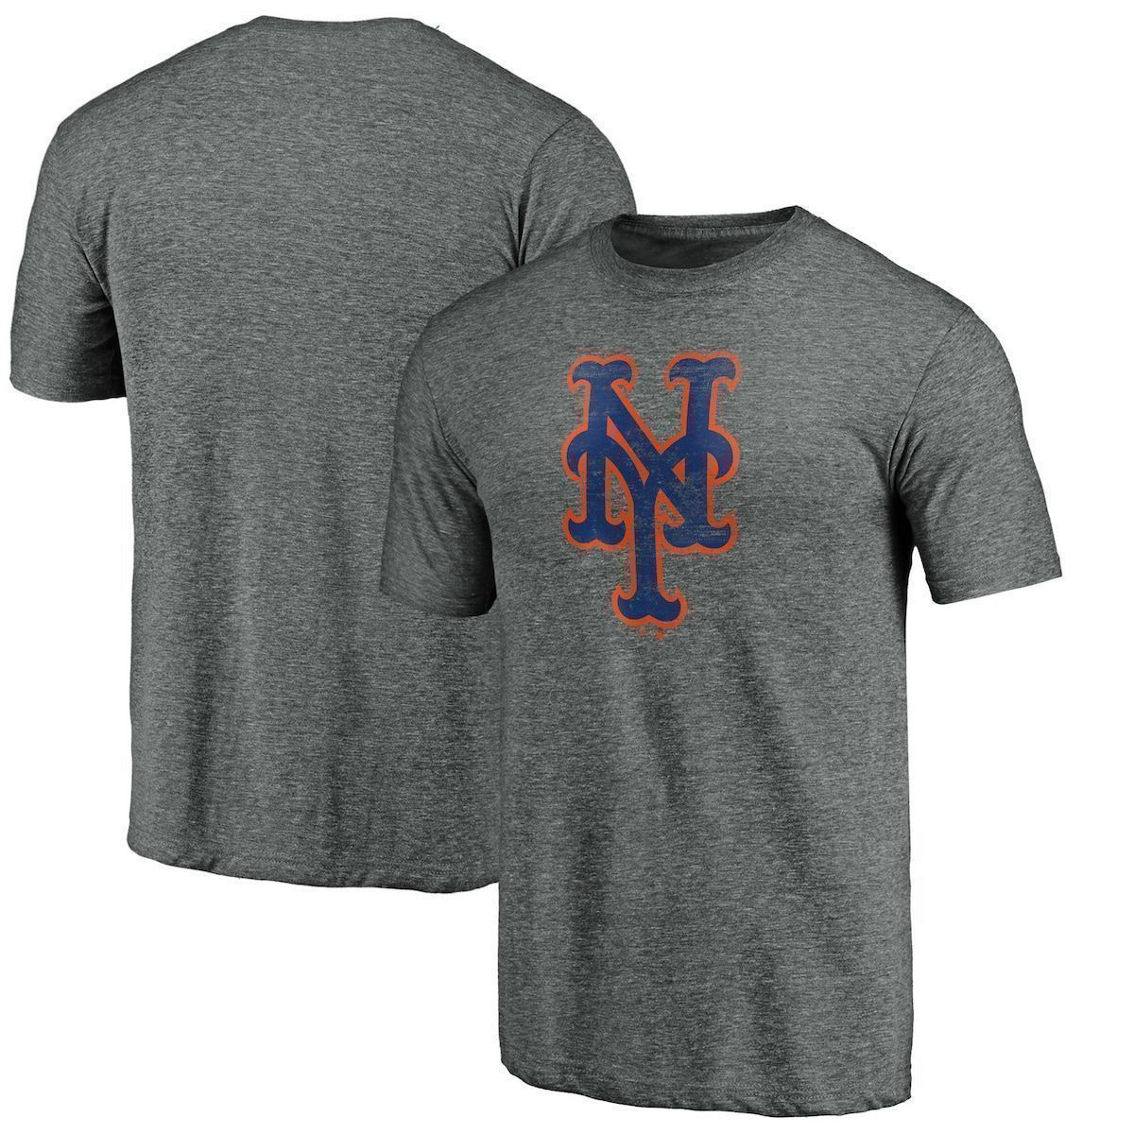 Fanatics Branded Men's Heathered Gray New York Mets Weathered Official Logo Tri-Blend T-Shirt - Image 2 of 4